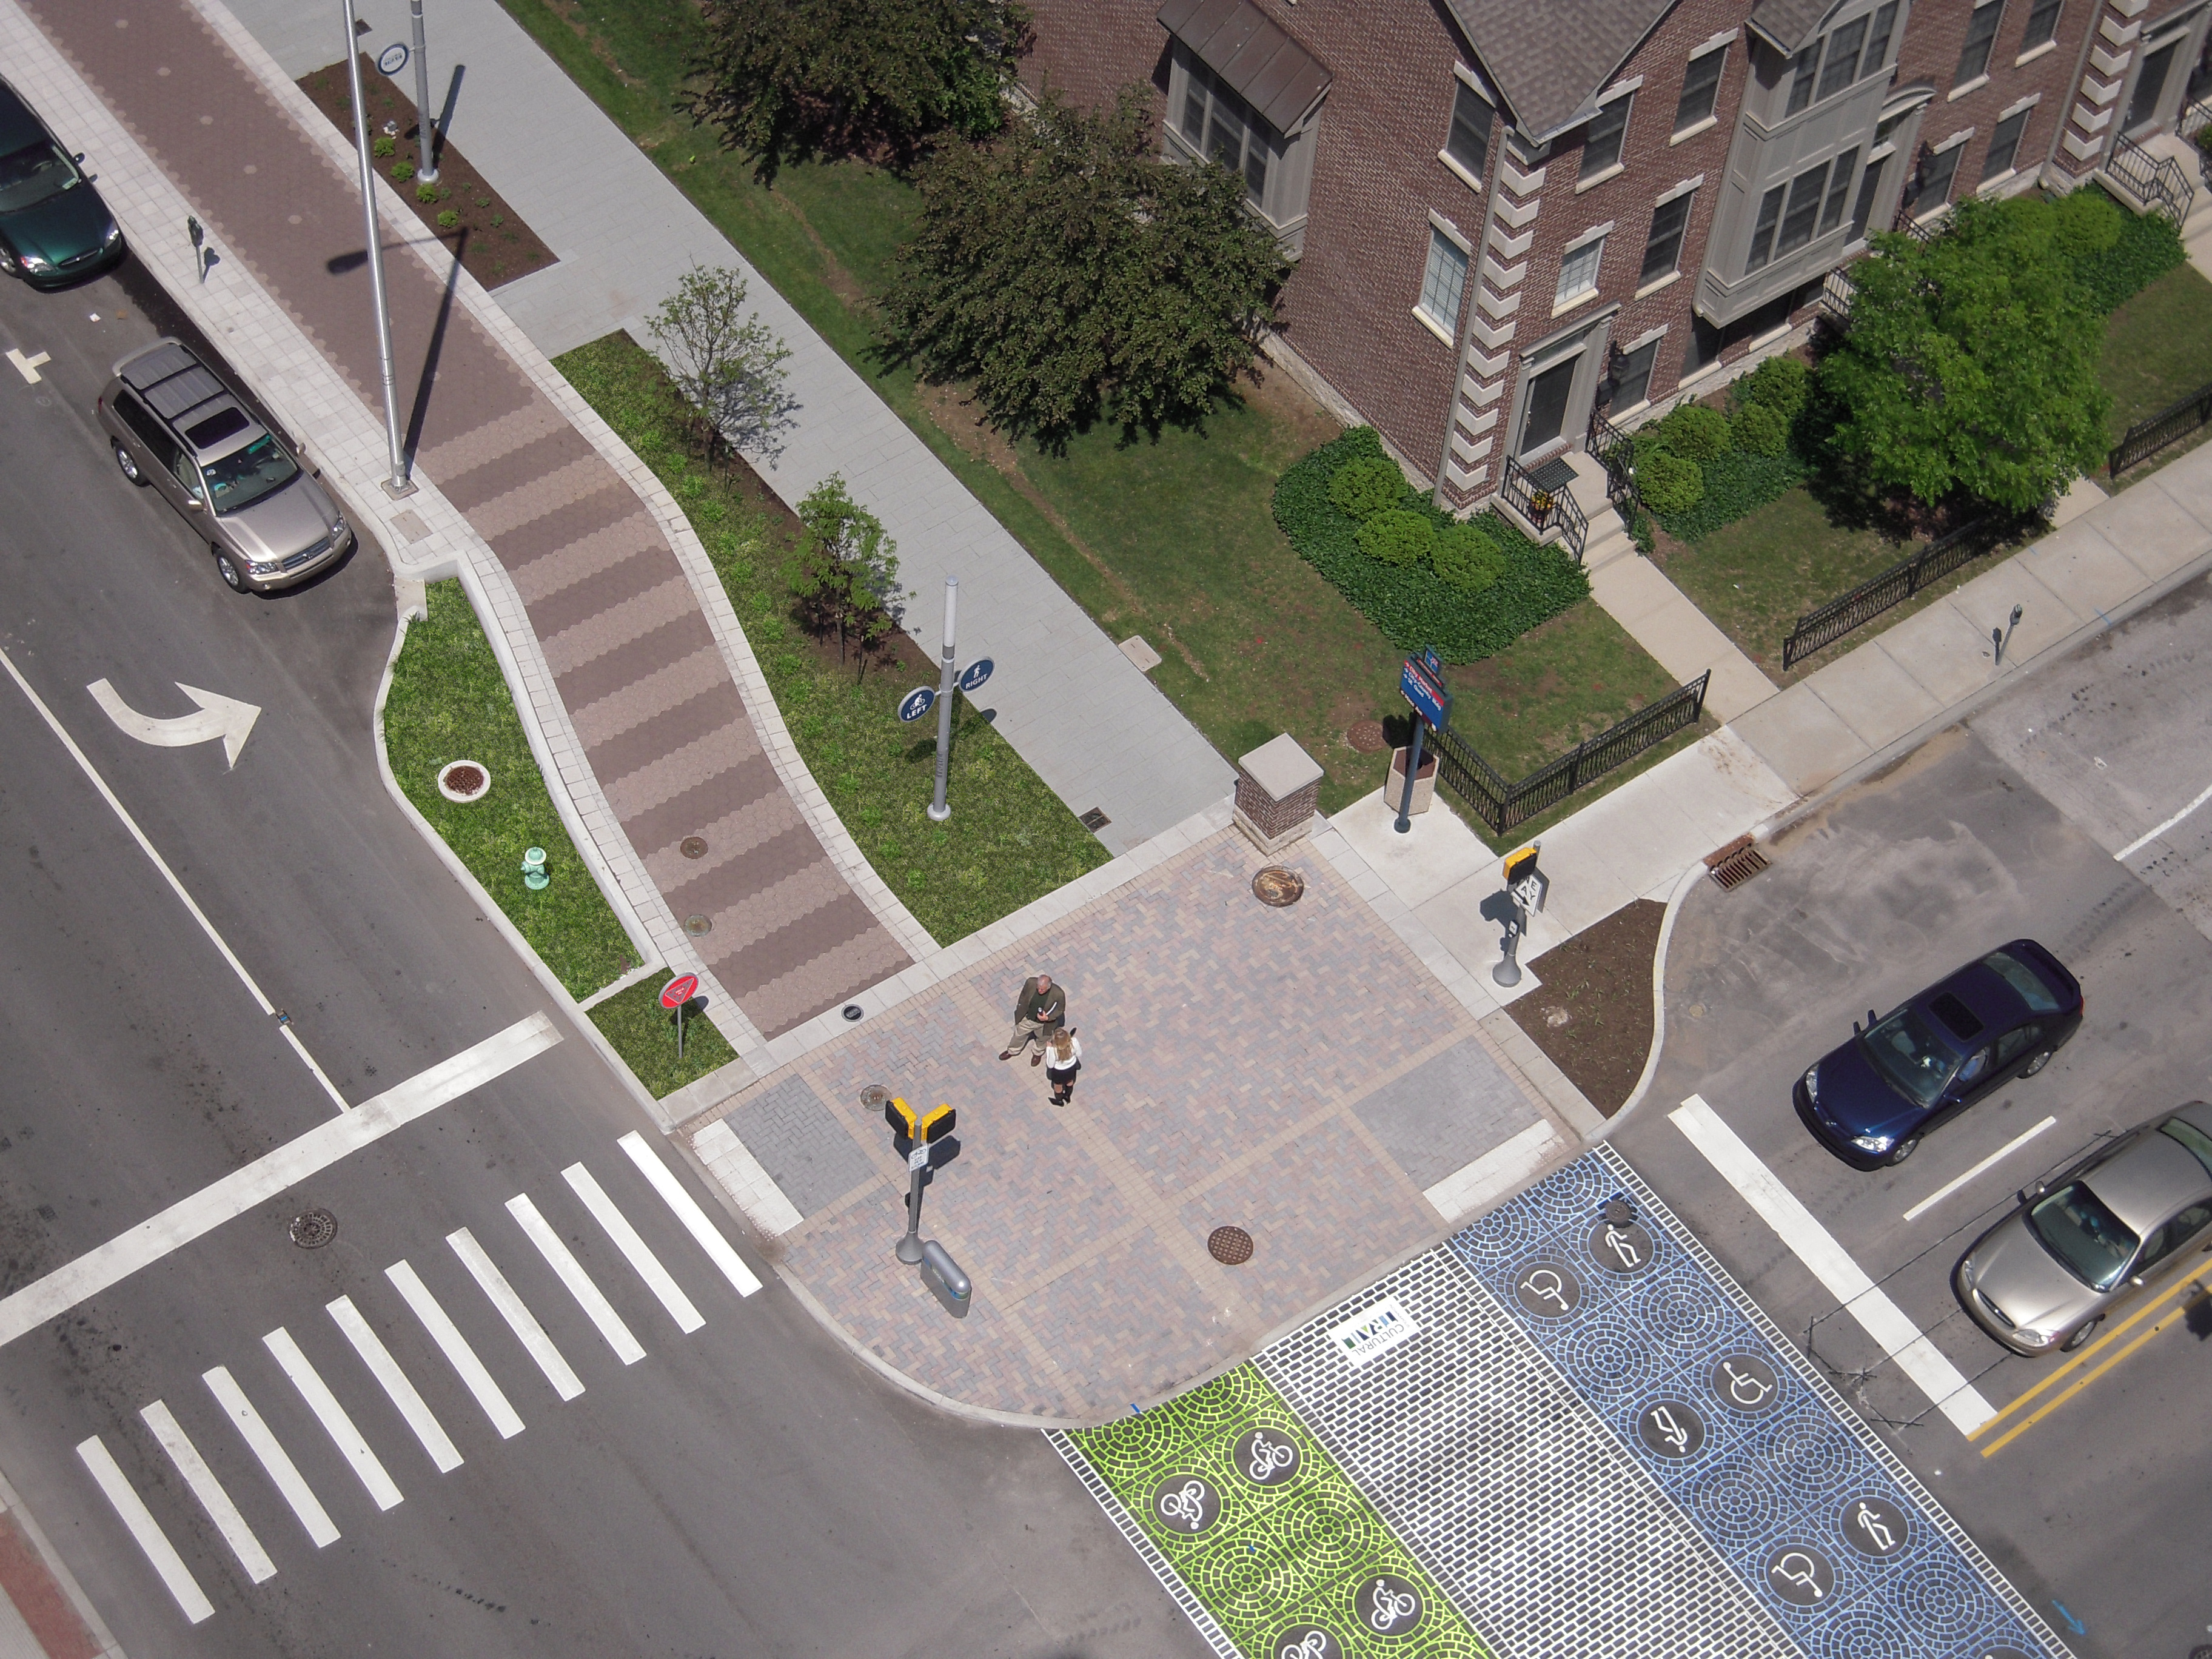 The design team bumped out the curbs to reduce crossing distances and used special pavement markings in the crosswalk.